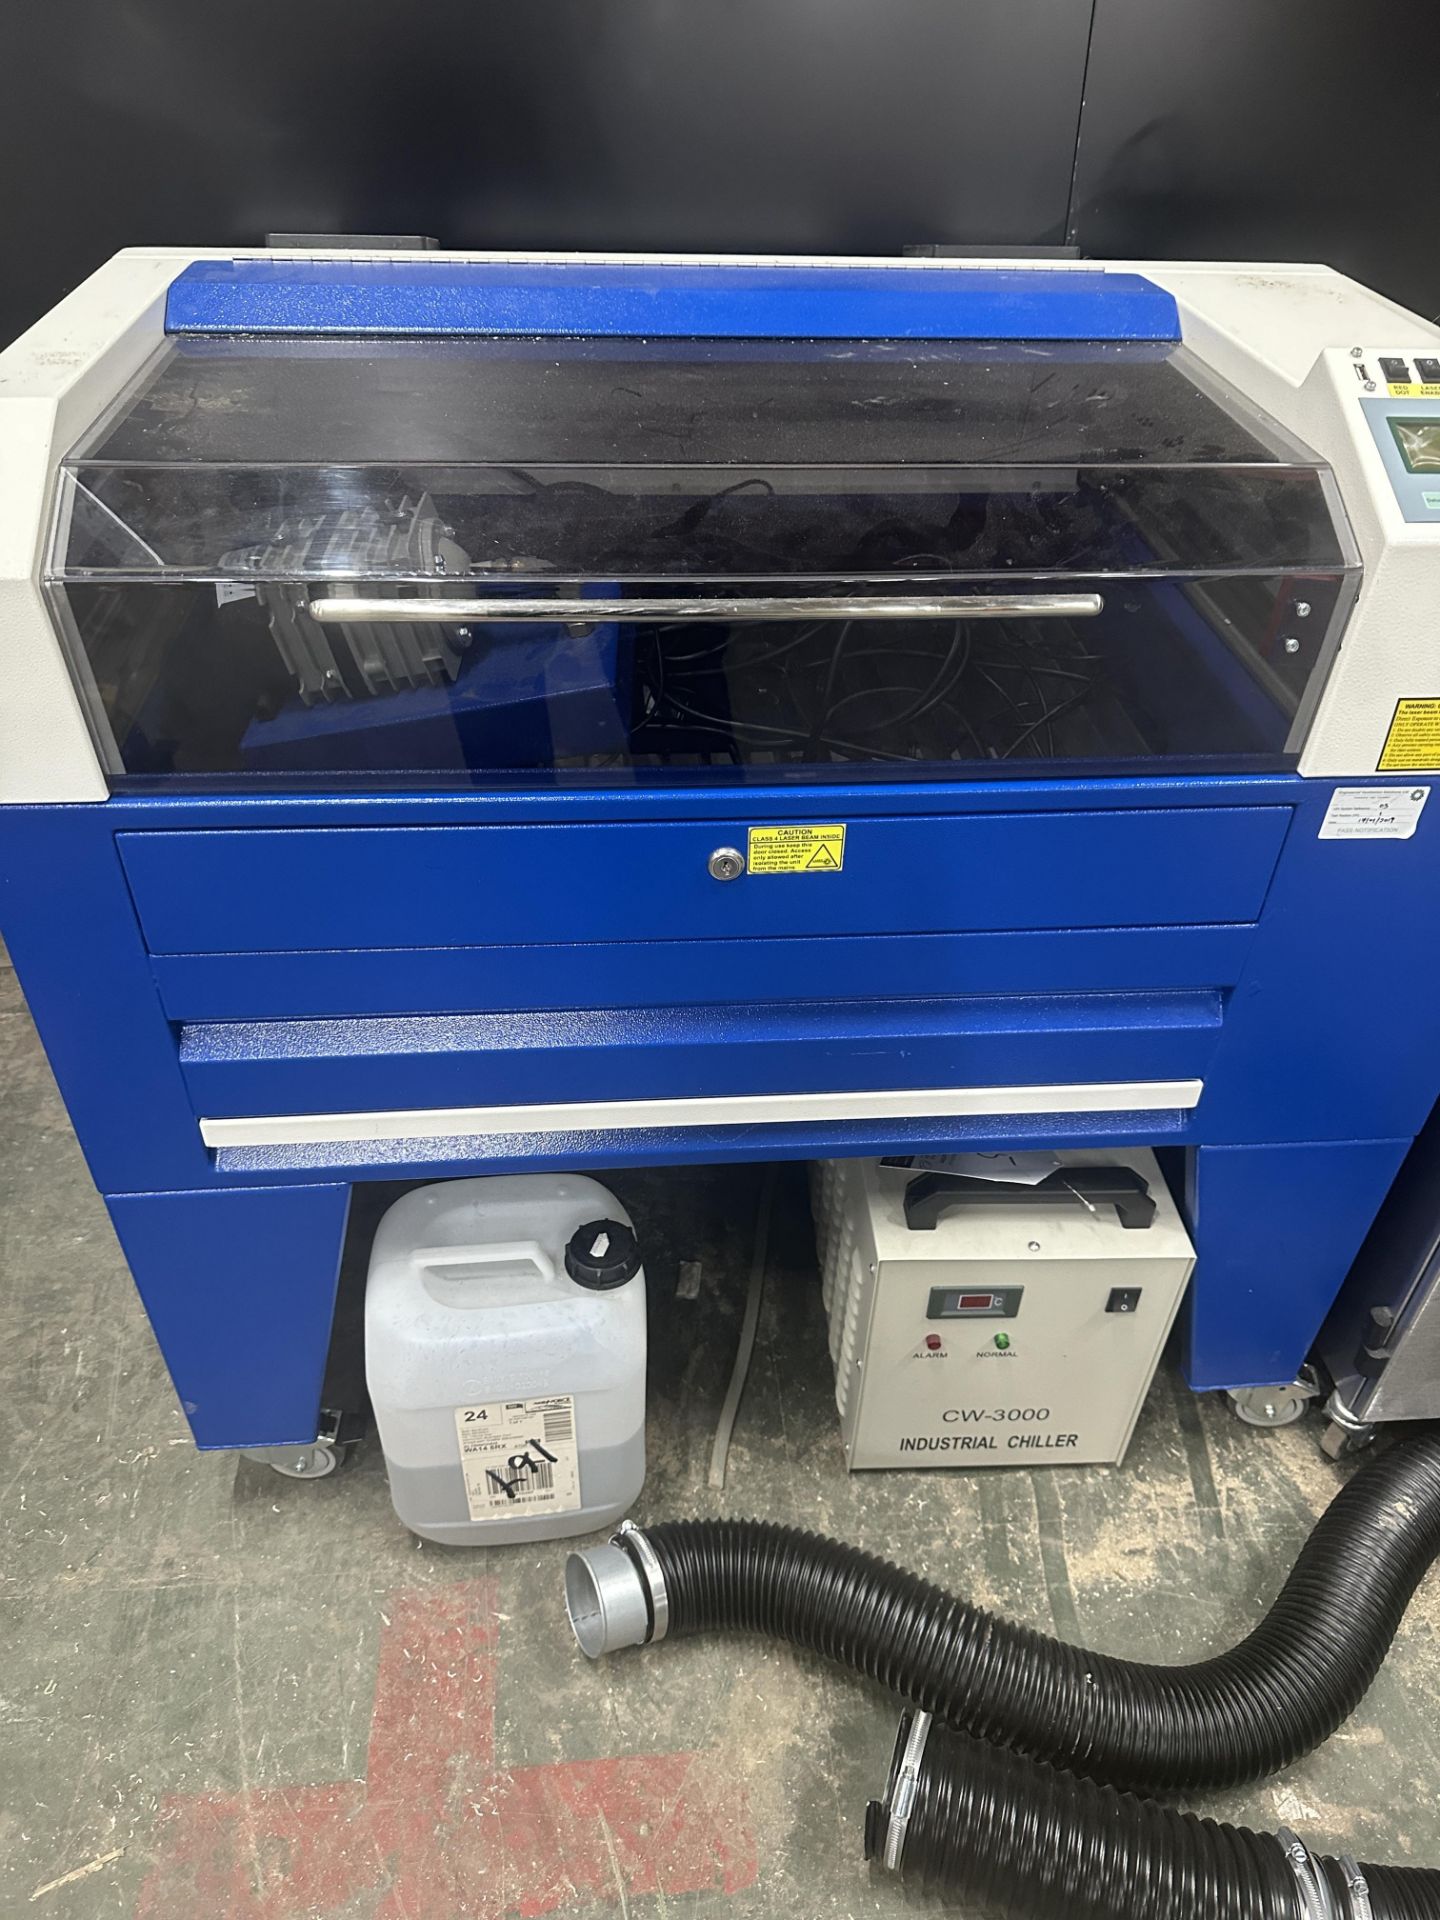 CTR TMX65 laser cutter with CW-3000 industrial chiller and Purex 9000 - 400i fume extraction system - Image 2 of 17